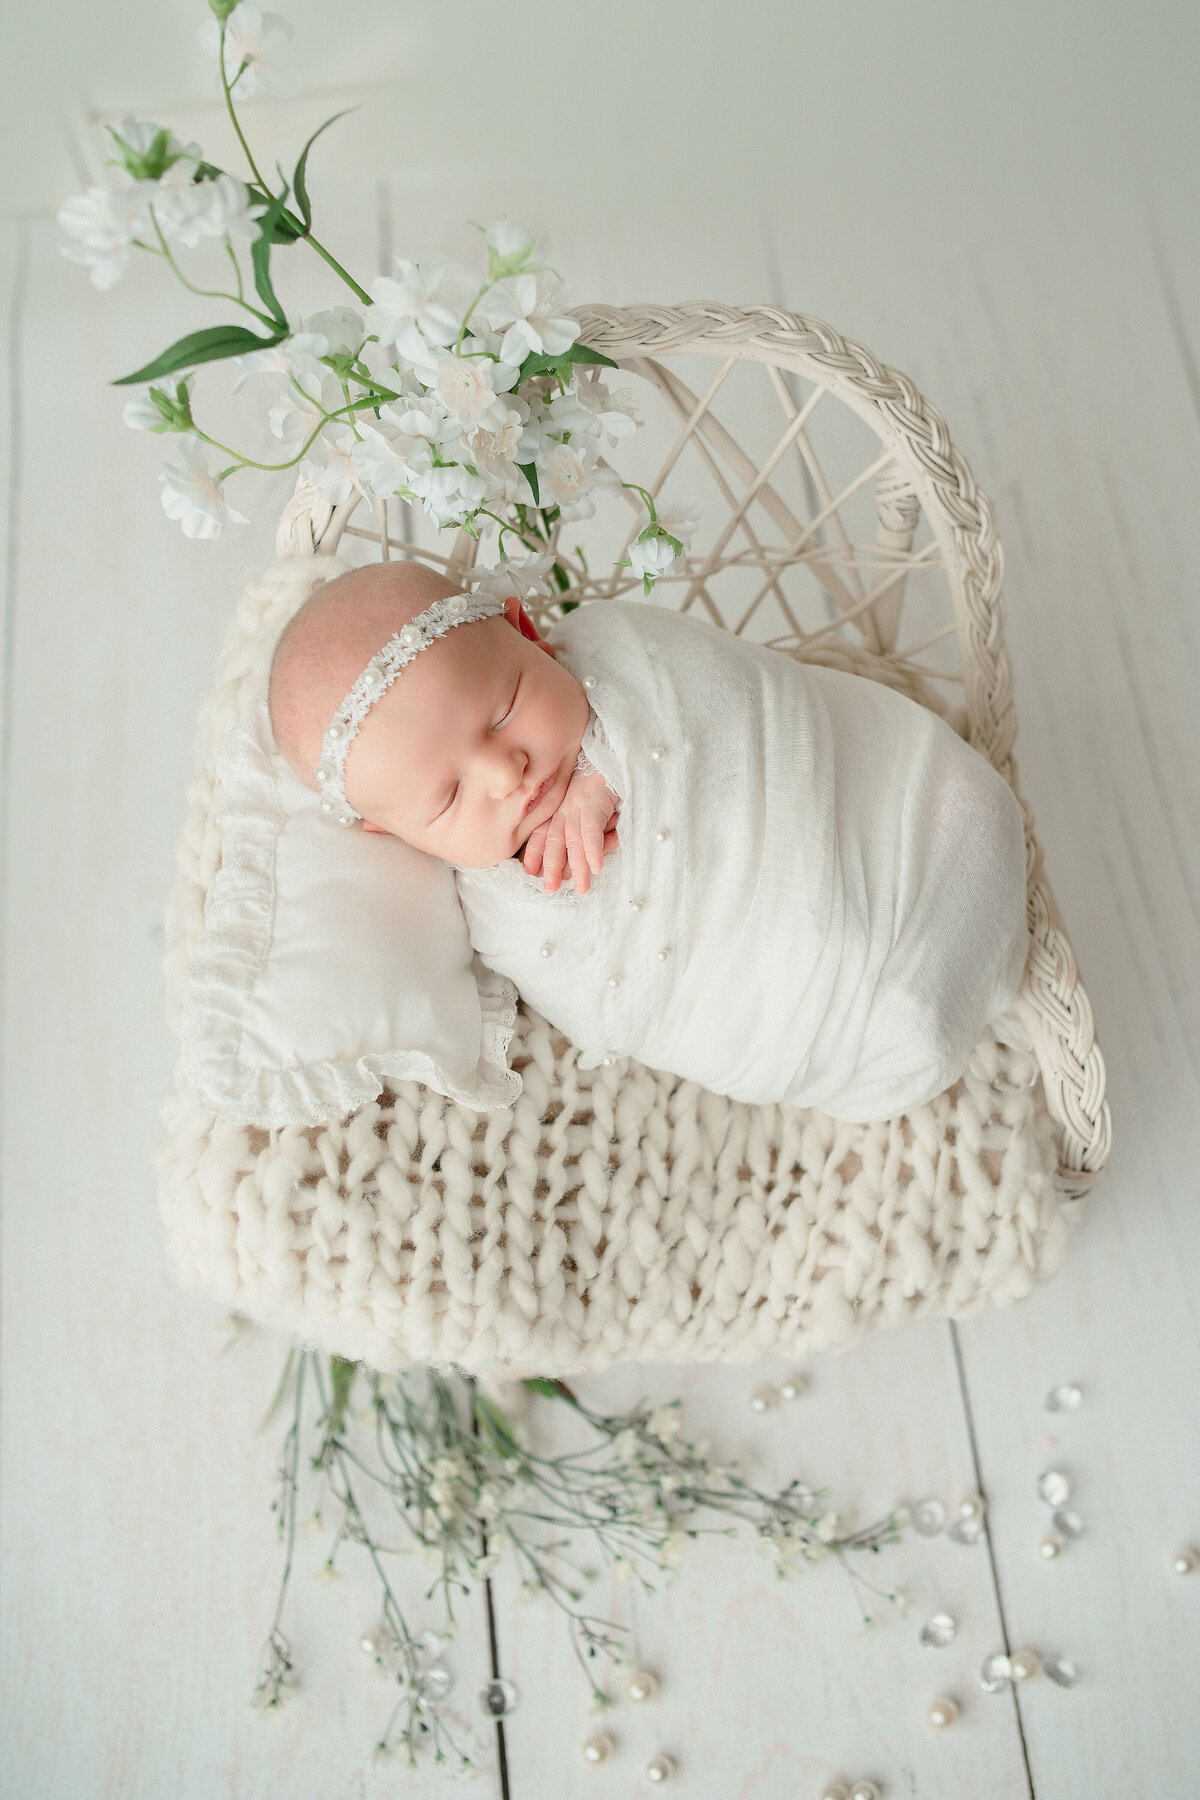 Sleeping 2 week old baby girl in white swaddle laying head on tiny white pillow propped up in white bohemian  miniature chair